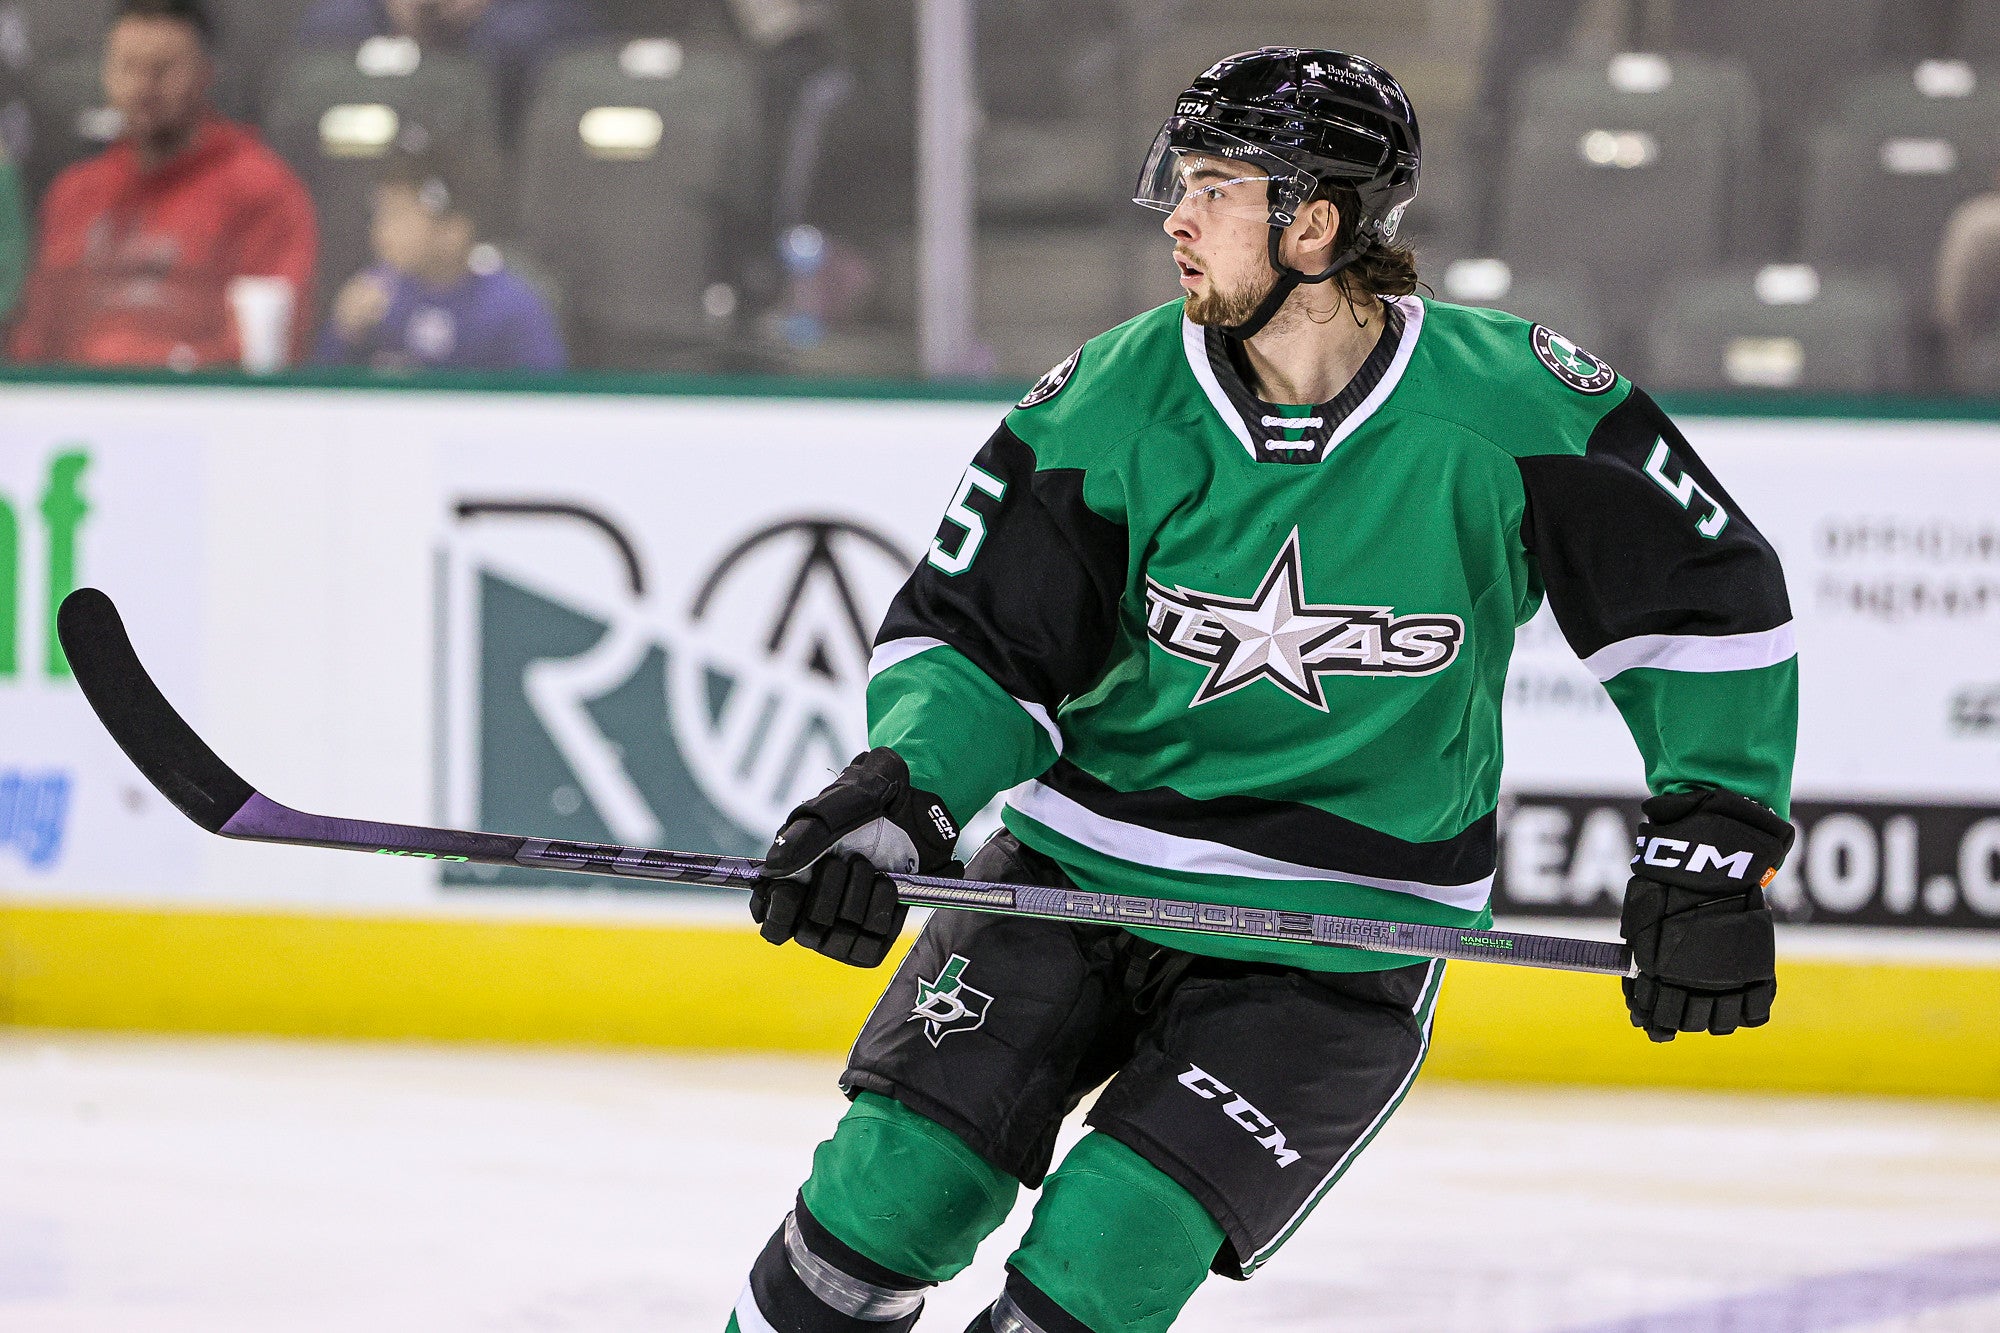 Stars Fall Short in Chicago after Fast Start, Texas Stars